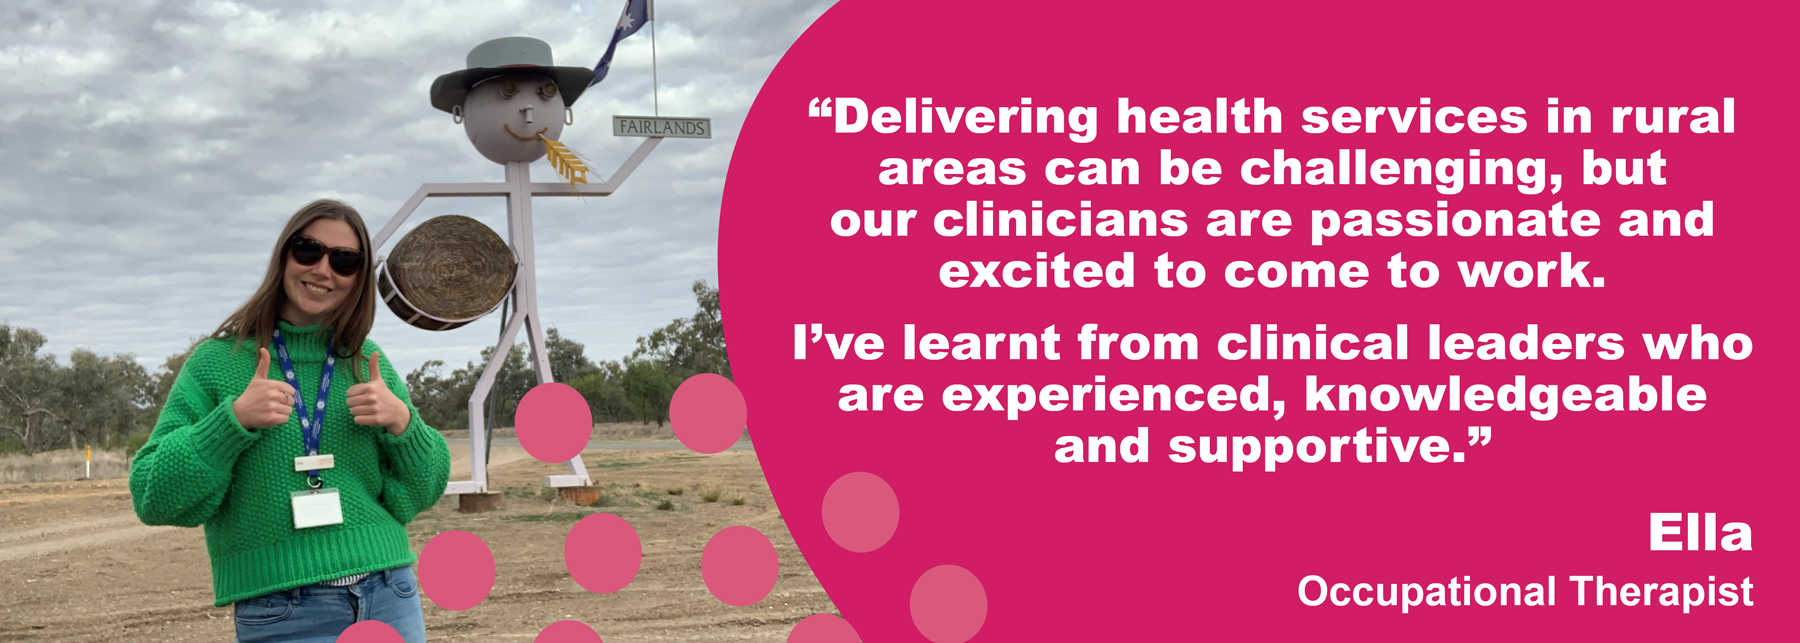 "Delivering heath services in rural areas can be challenging, but our clinicians are passionate and excited to come to work. I've learnt from clinical leaders who are experienced, knowledgeable and supportive." – Ella, Occupational Therapist